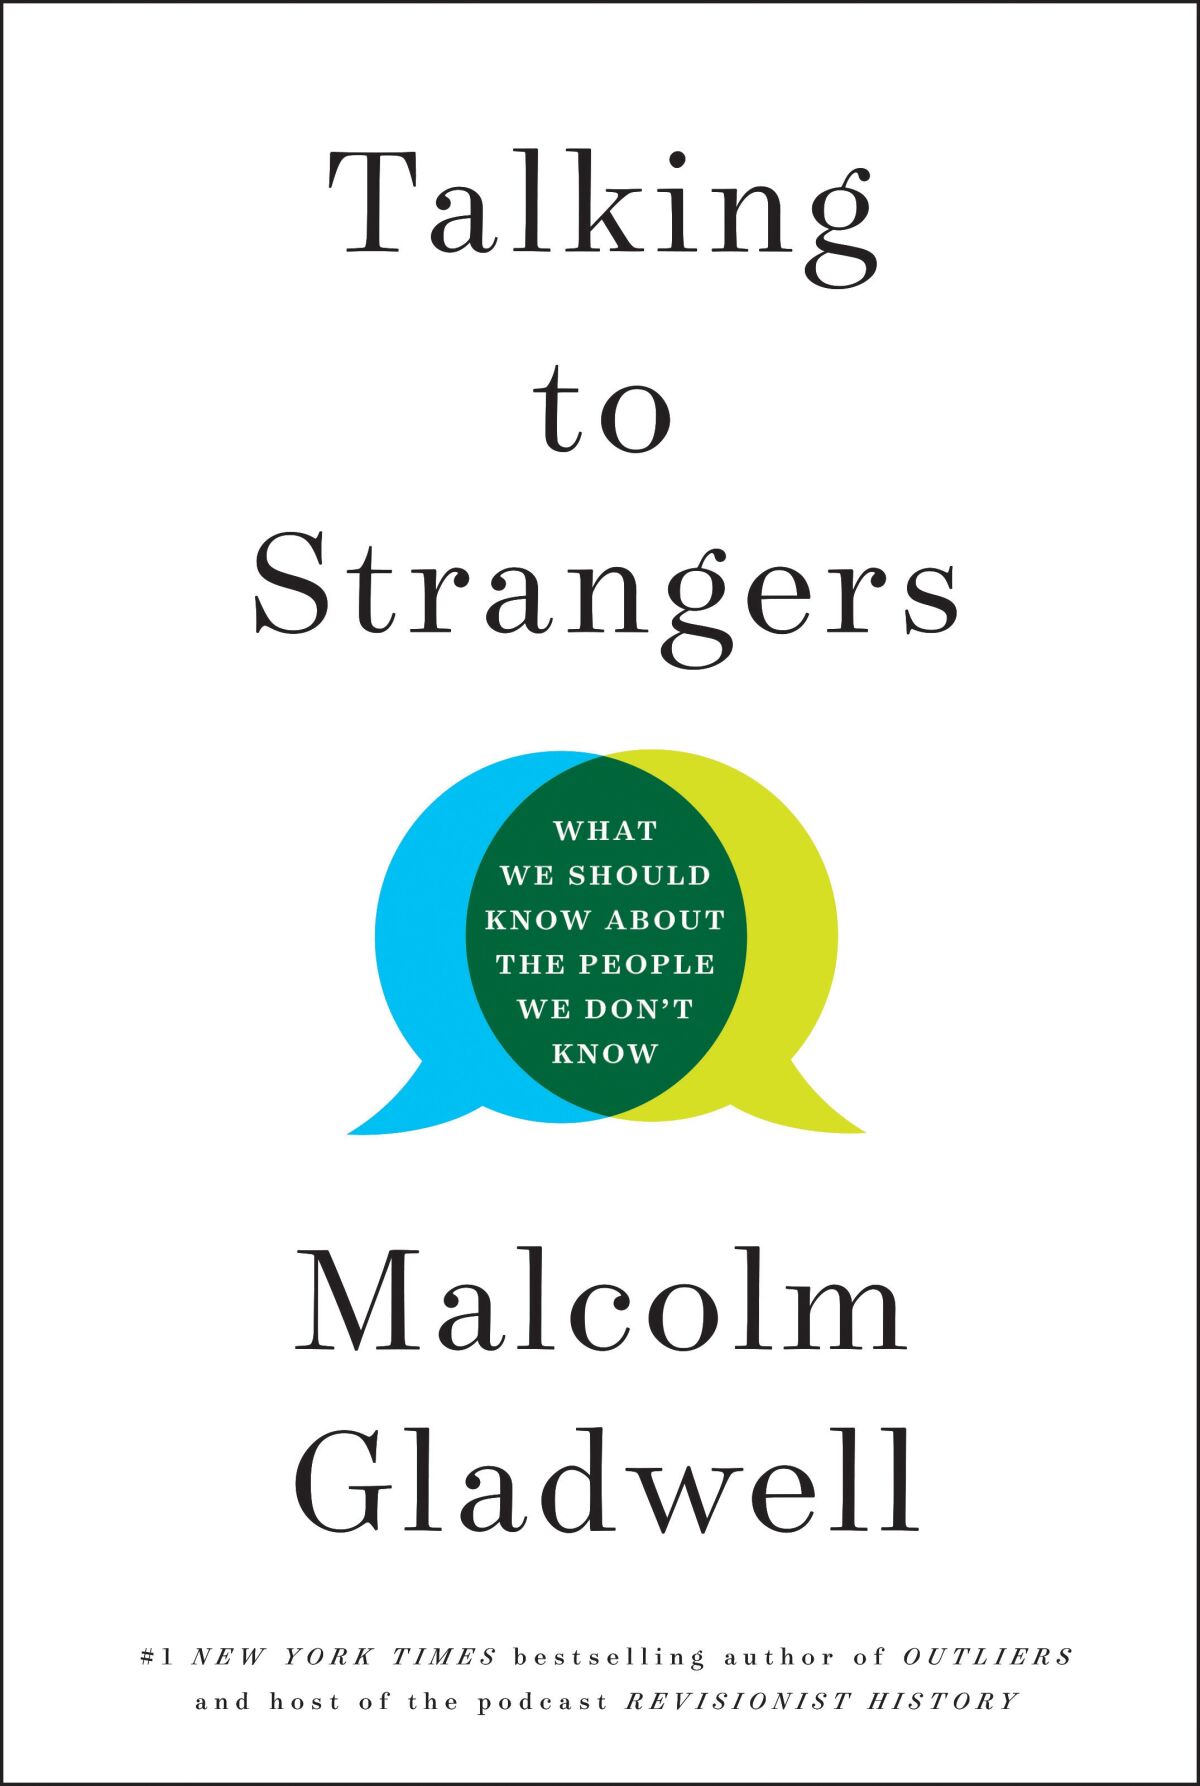 'Talking with Strangers' by Malcolm Gladwell